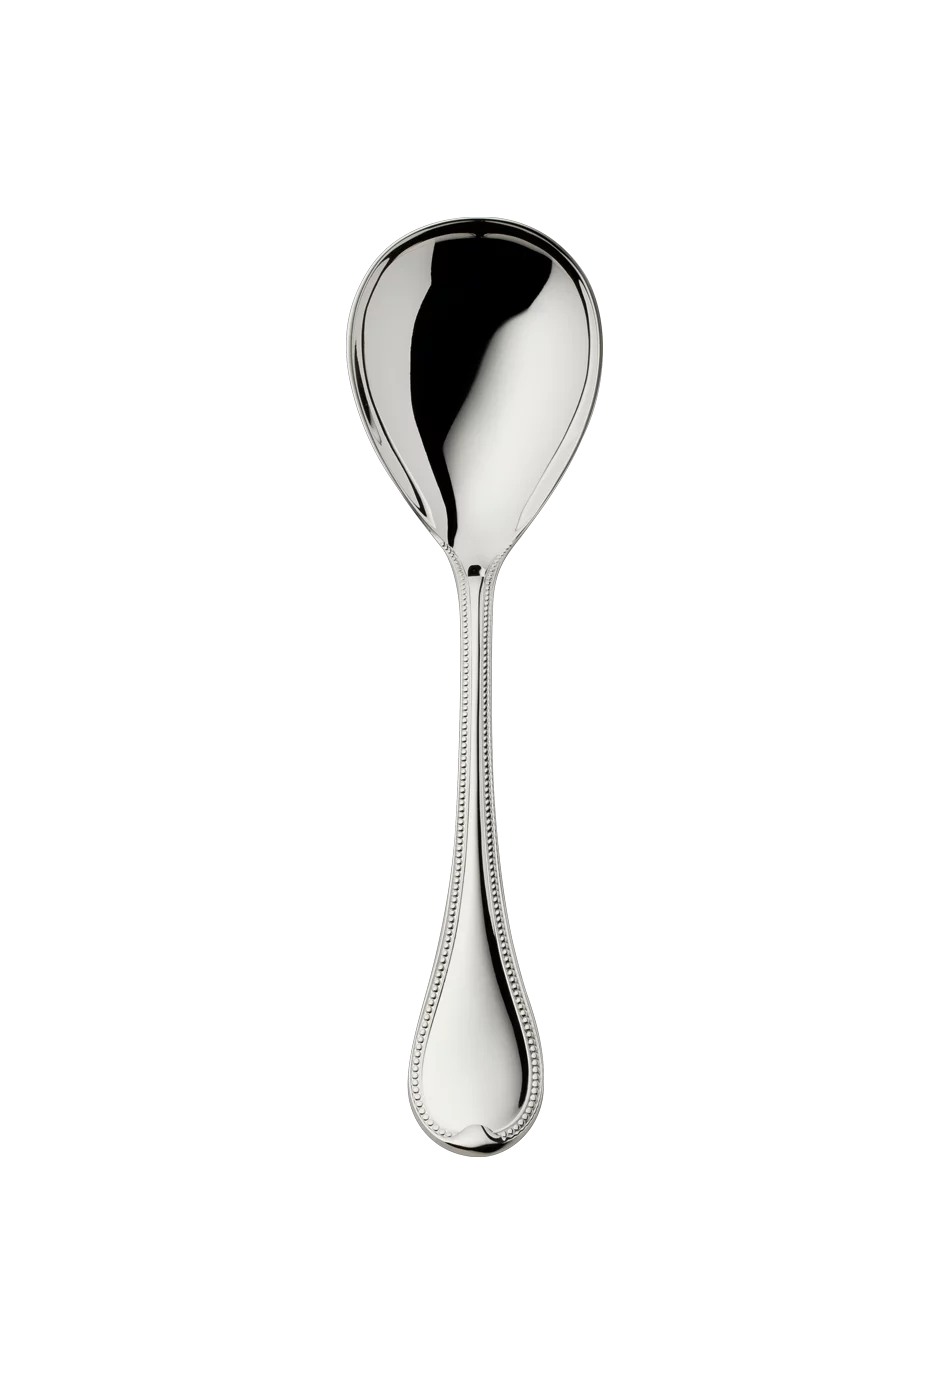 Französisch-Perl Compote/Salad Serving Spoon, large (150g massive silverplated)